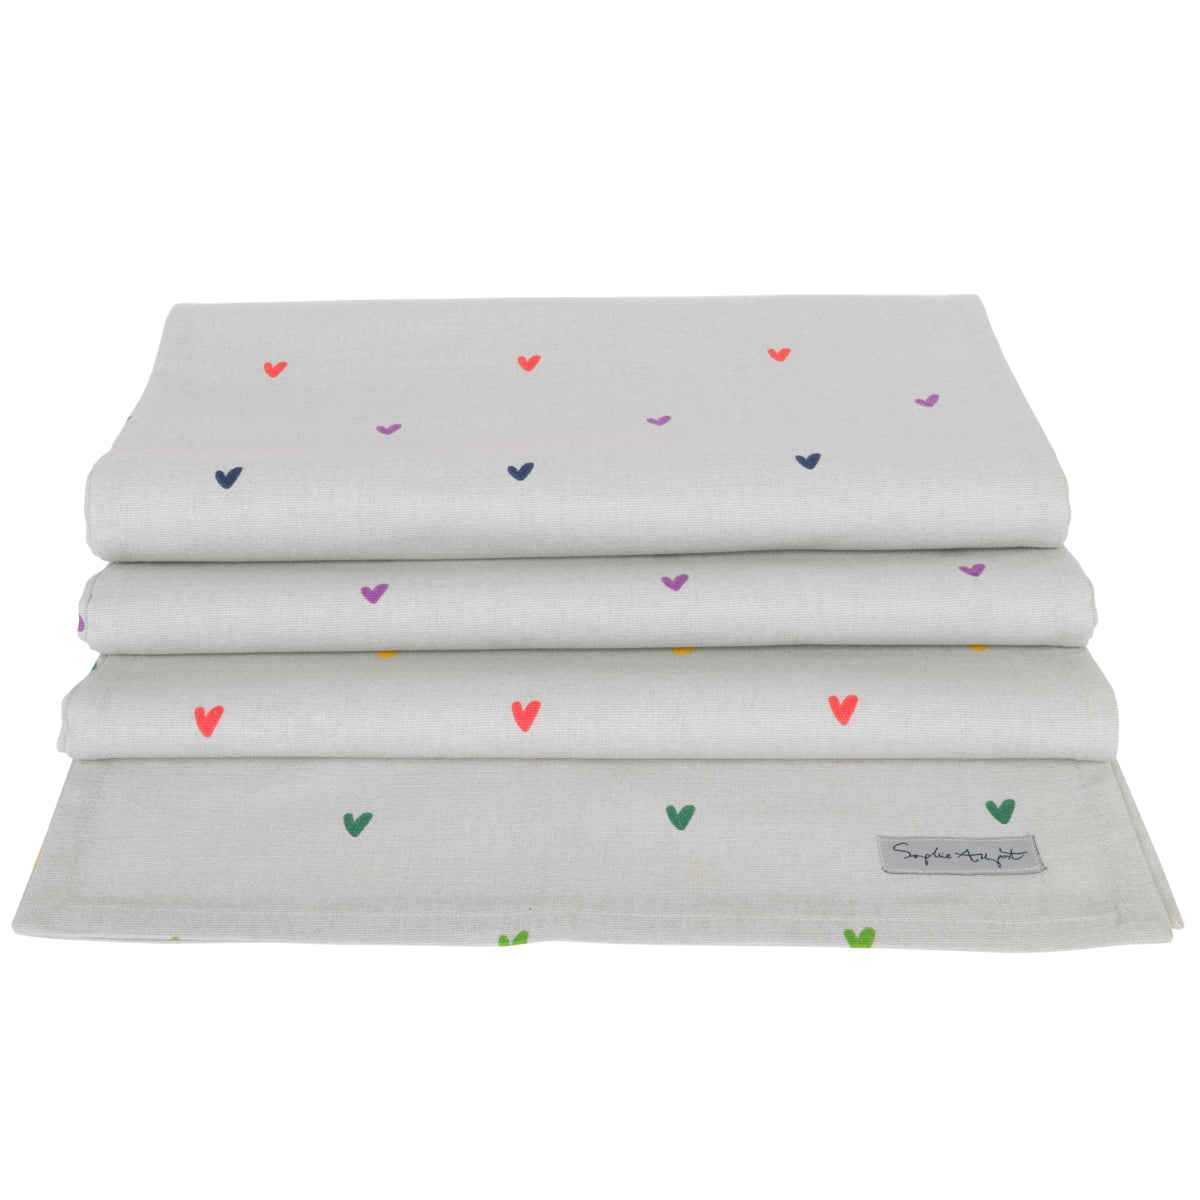 Multicoloured Hearts Table Runner by Sophie Allport